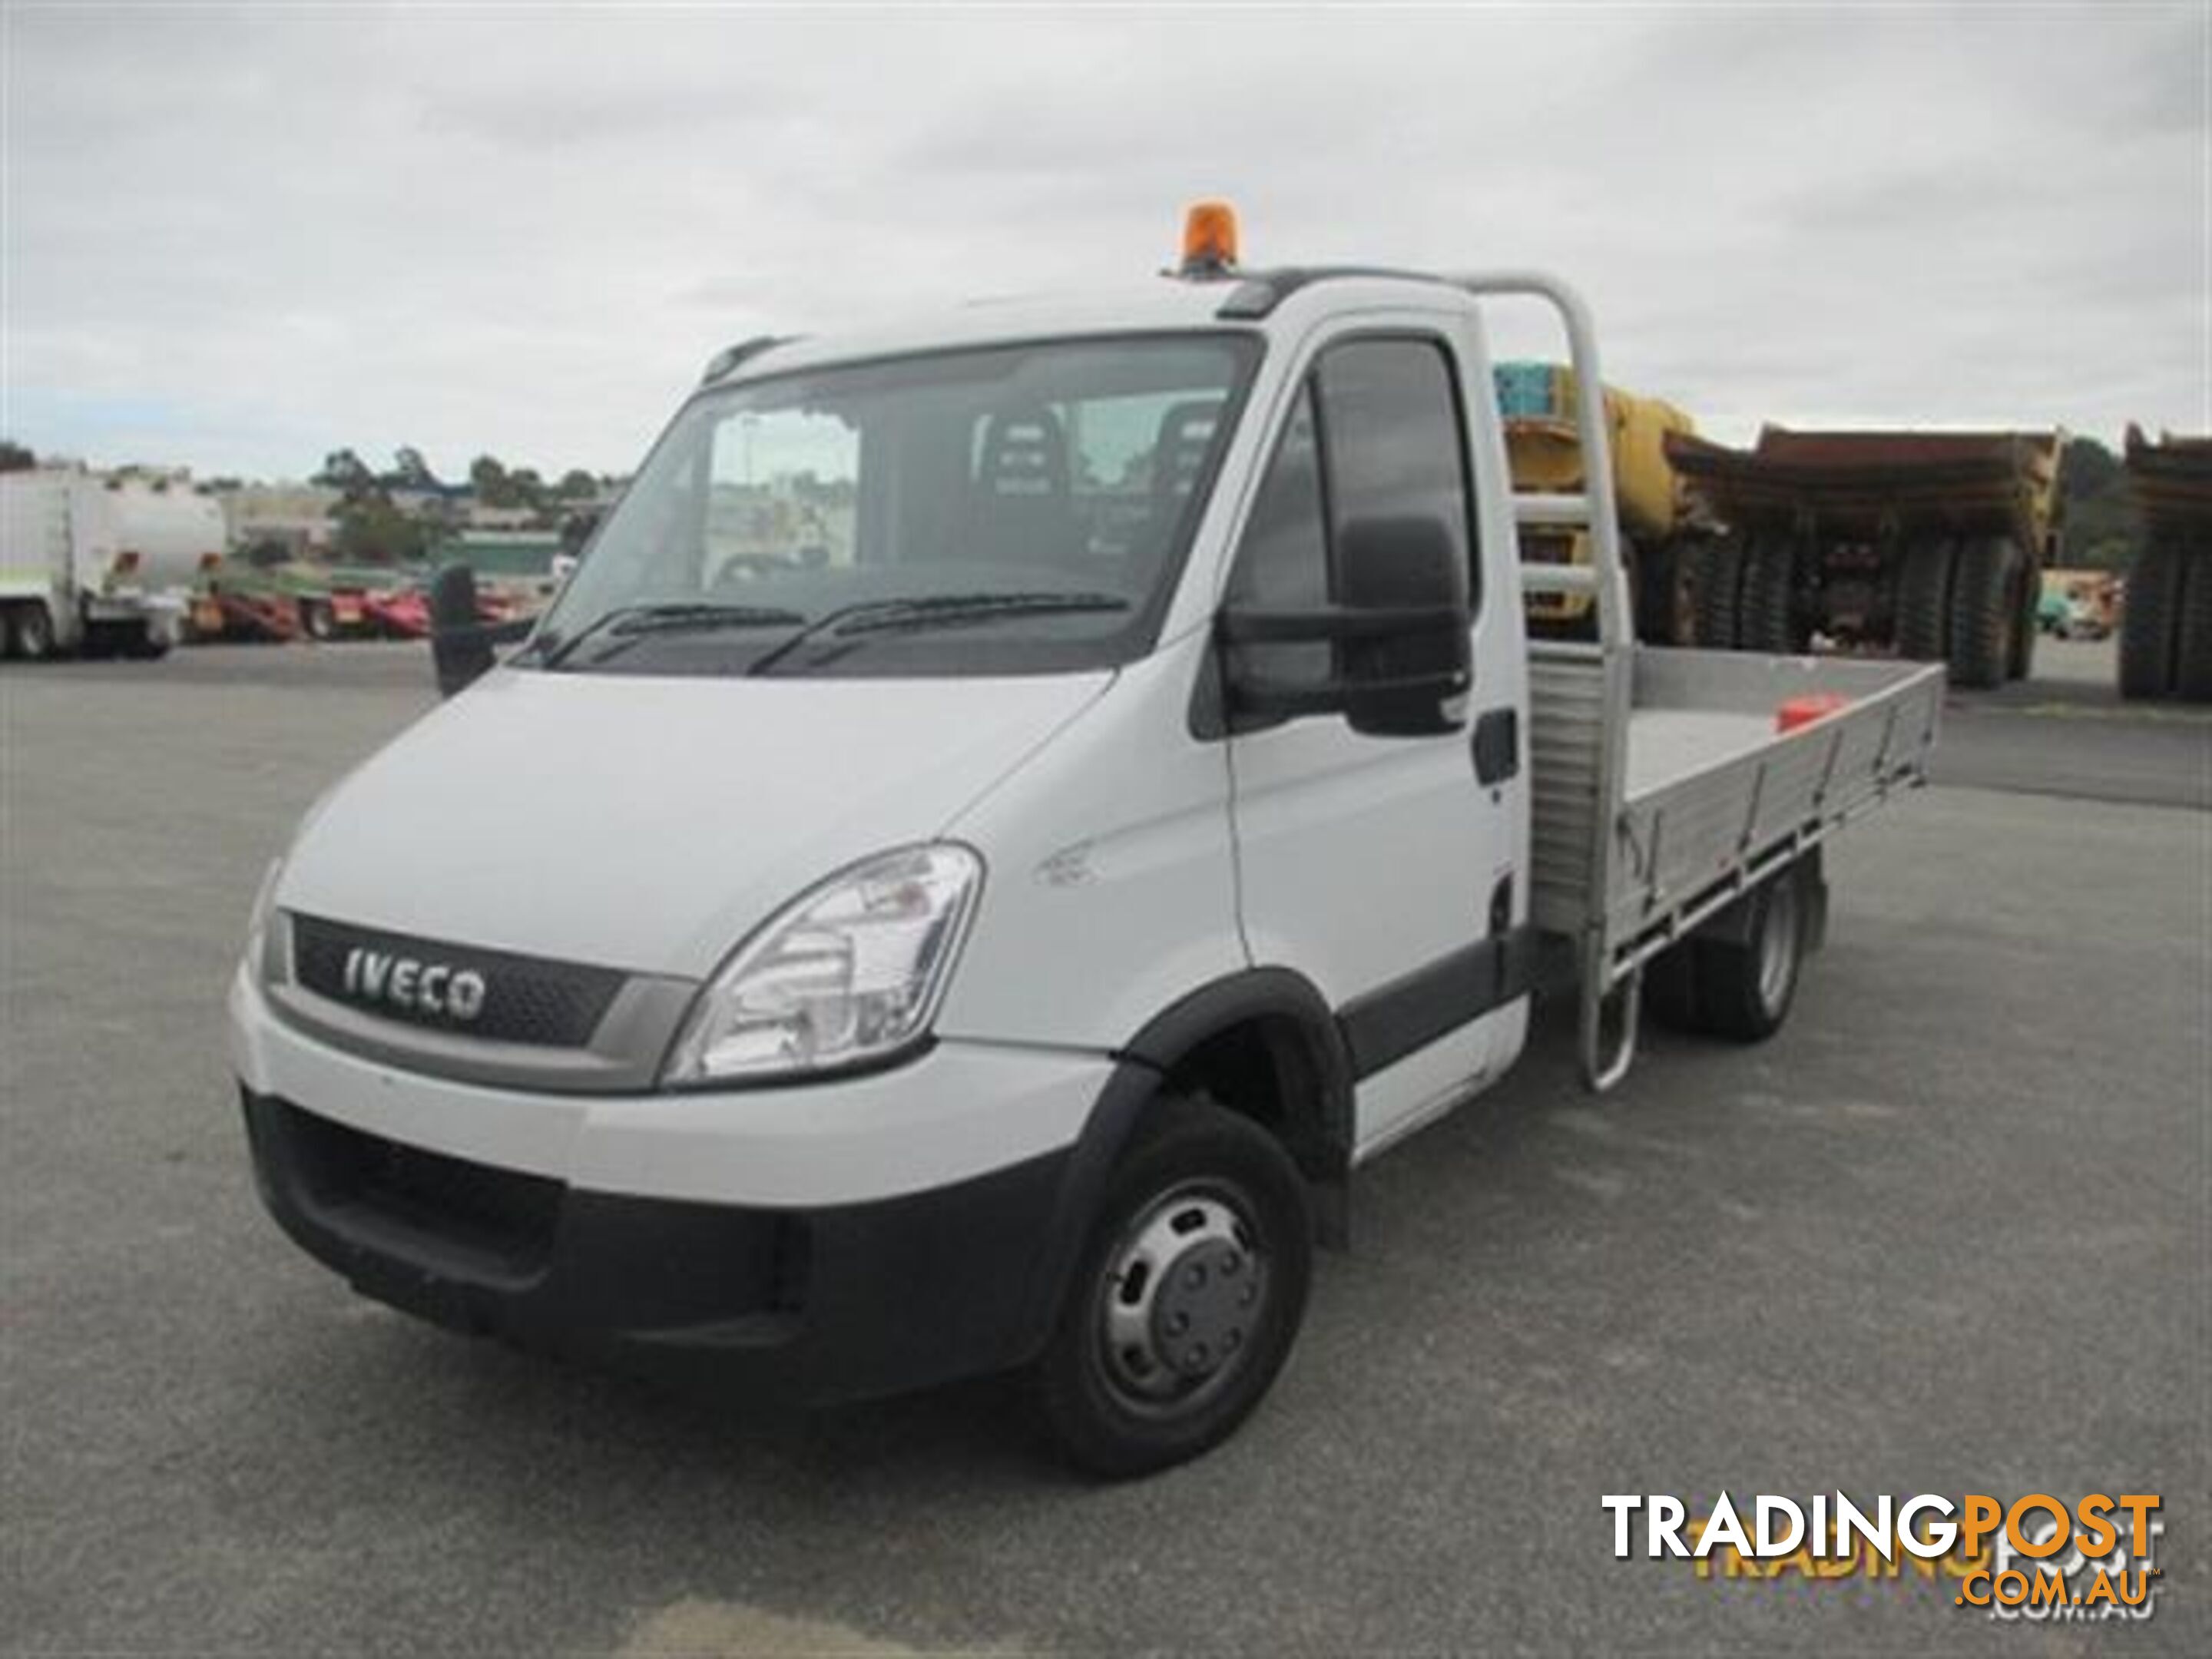 2010 IVECO DAILY CAB CHASSIS AGILE EURO 4 50C18 3.0LTR***IVECO DAILY PARTS VIC***